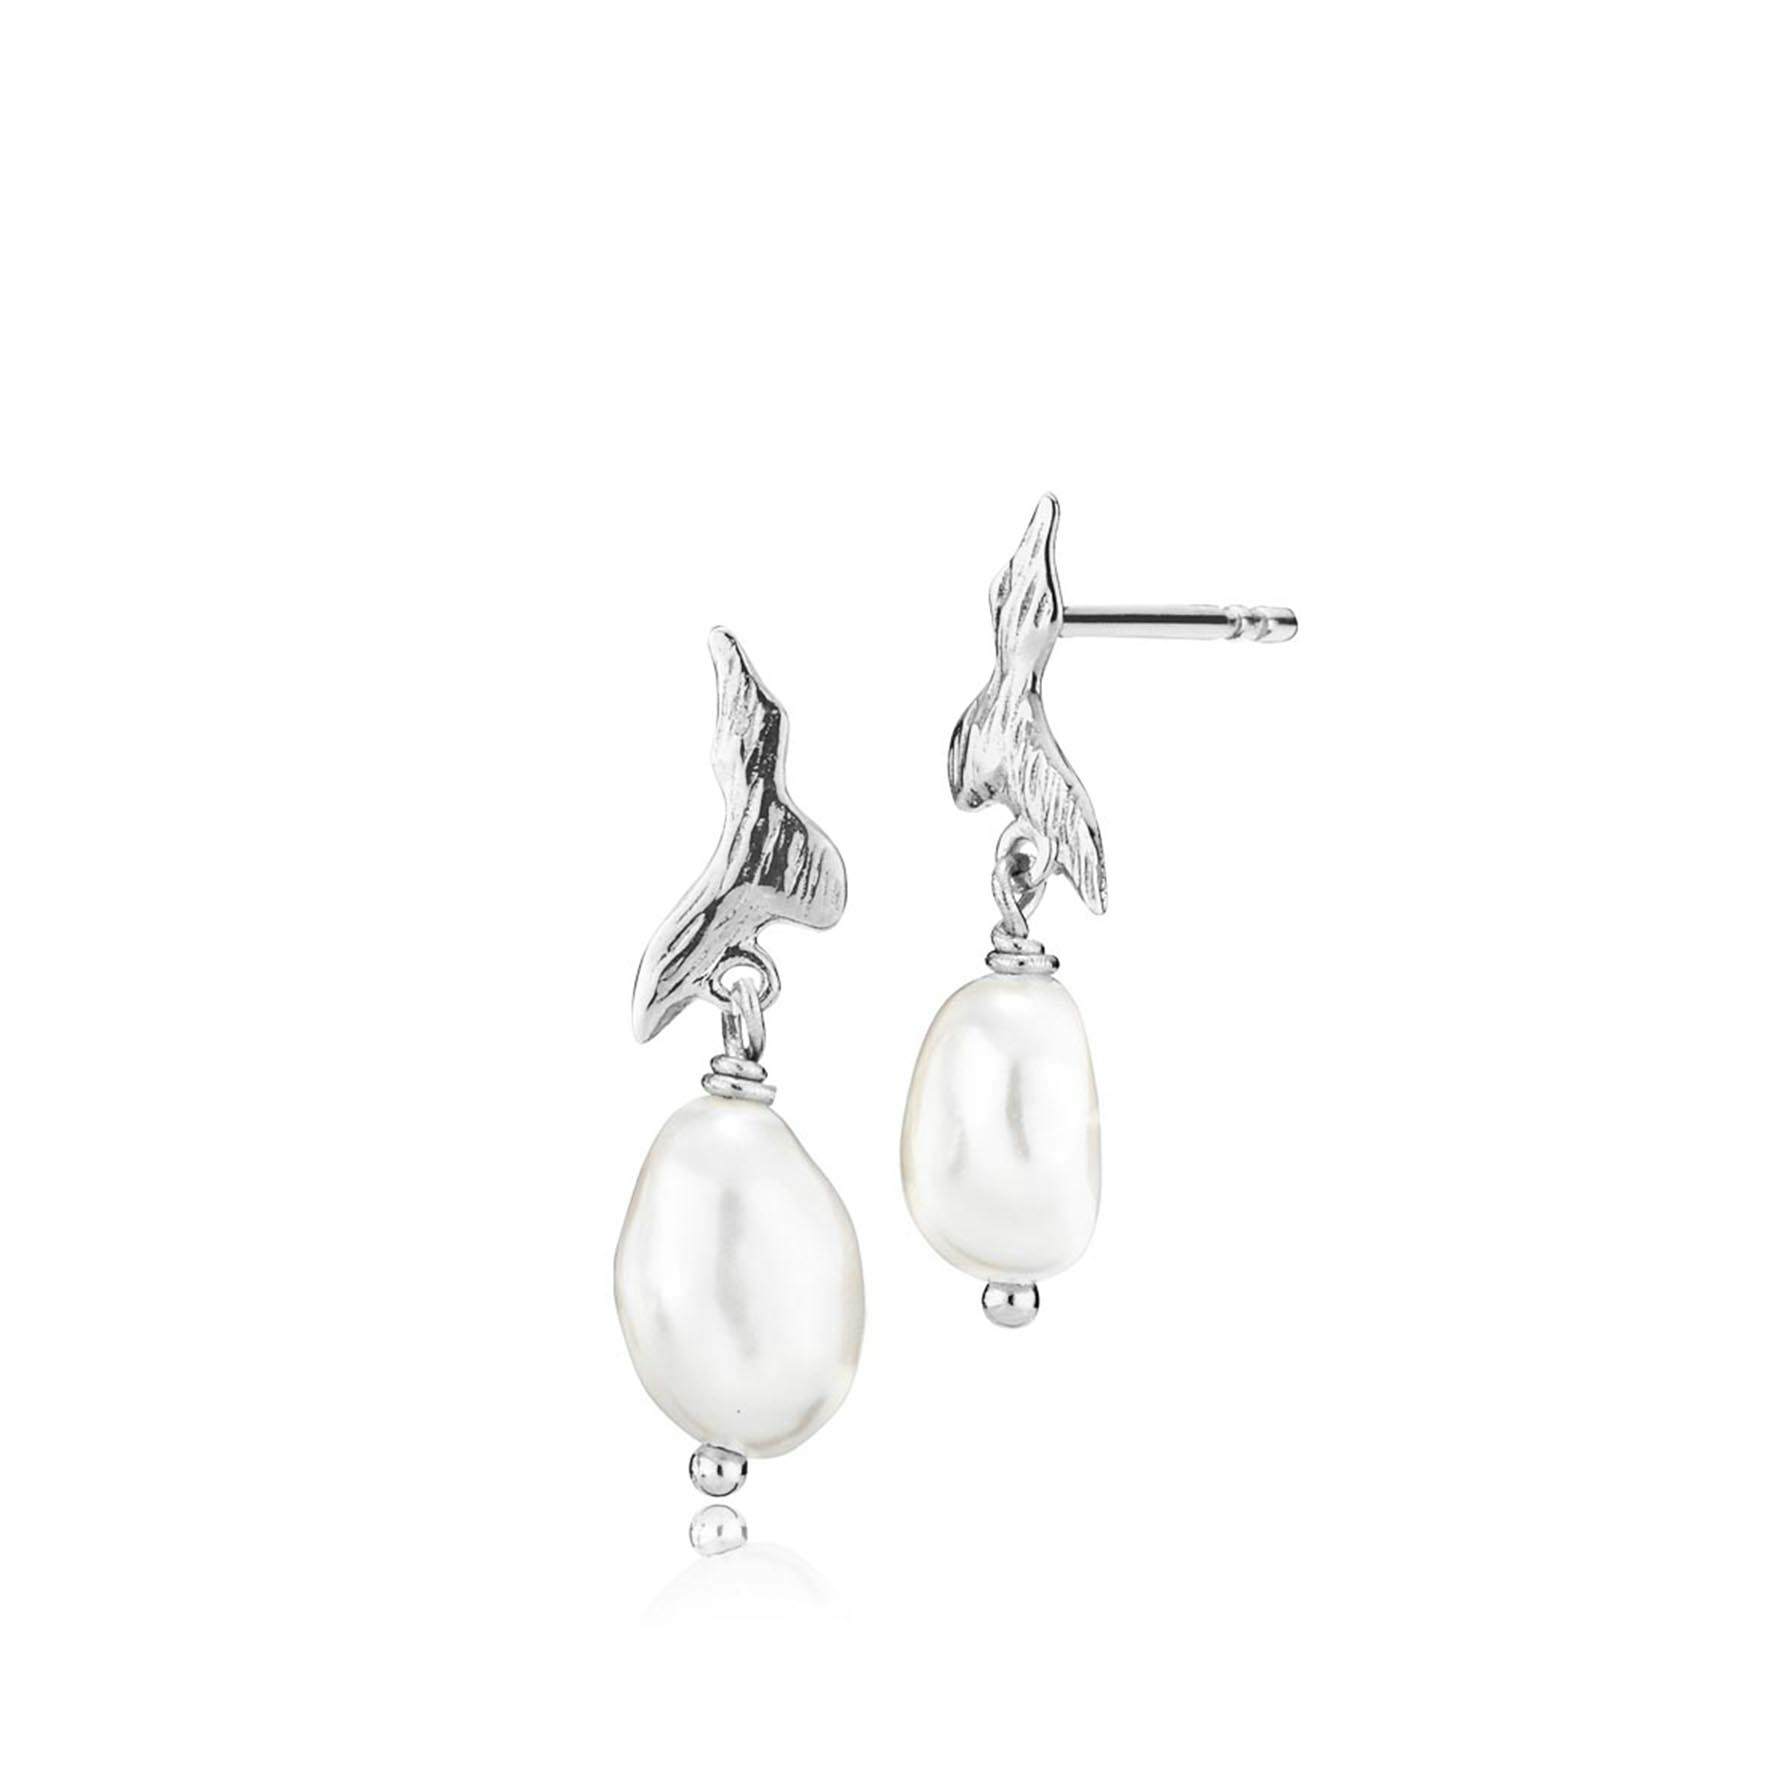 Fairy Earrings With Pearl von Izabel Camille in Silber Sterling 925